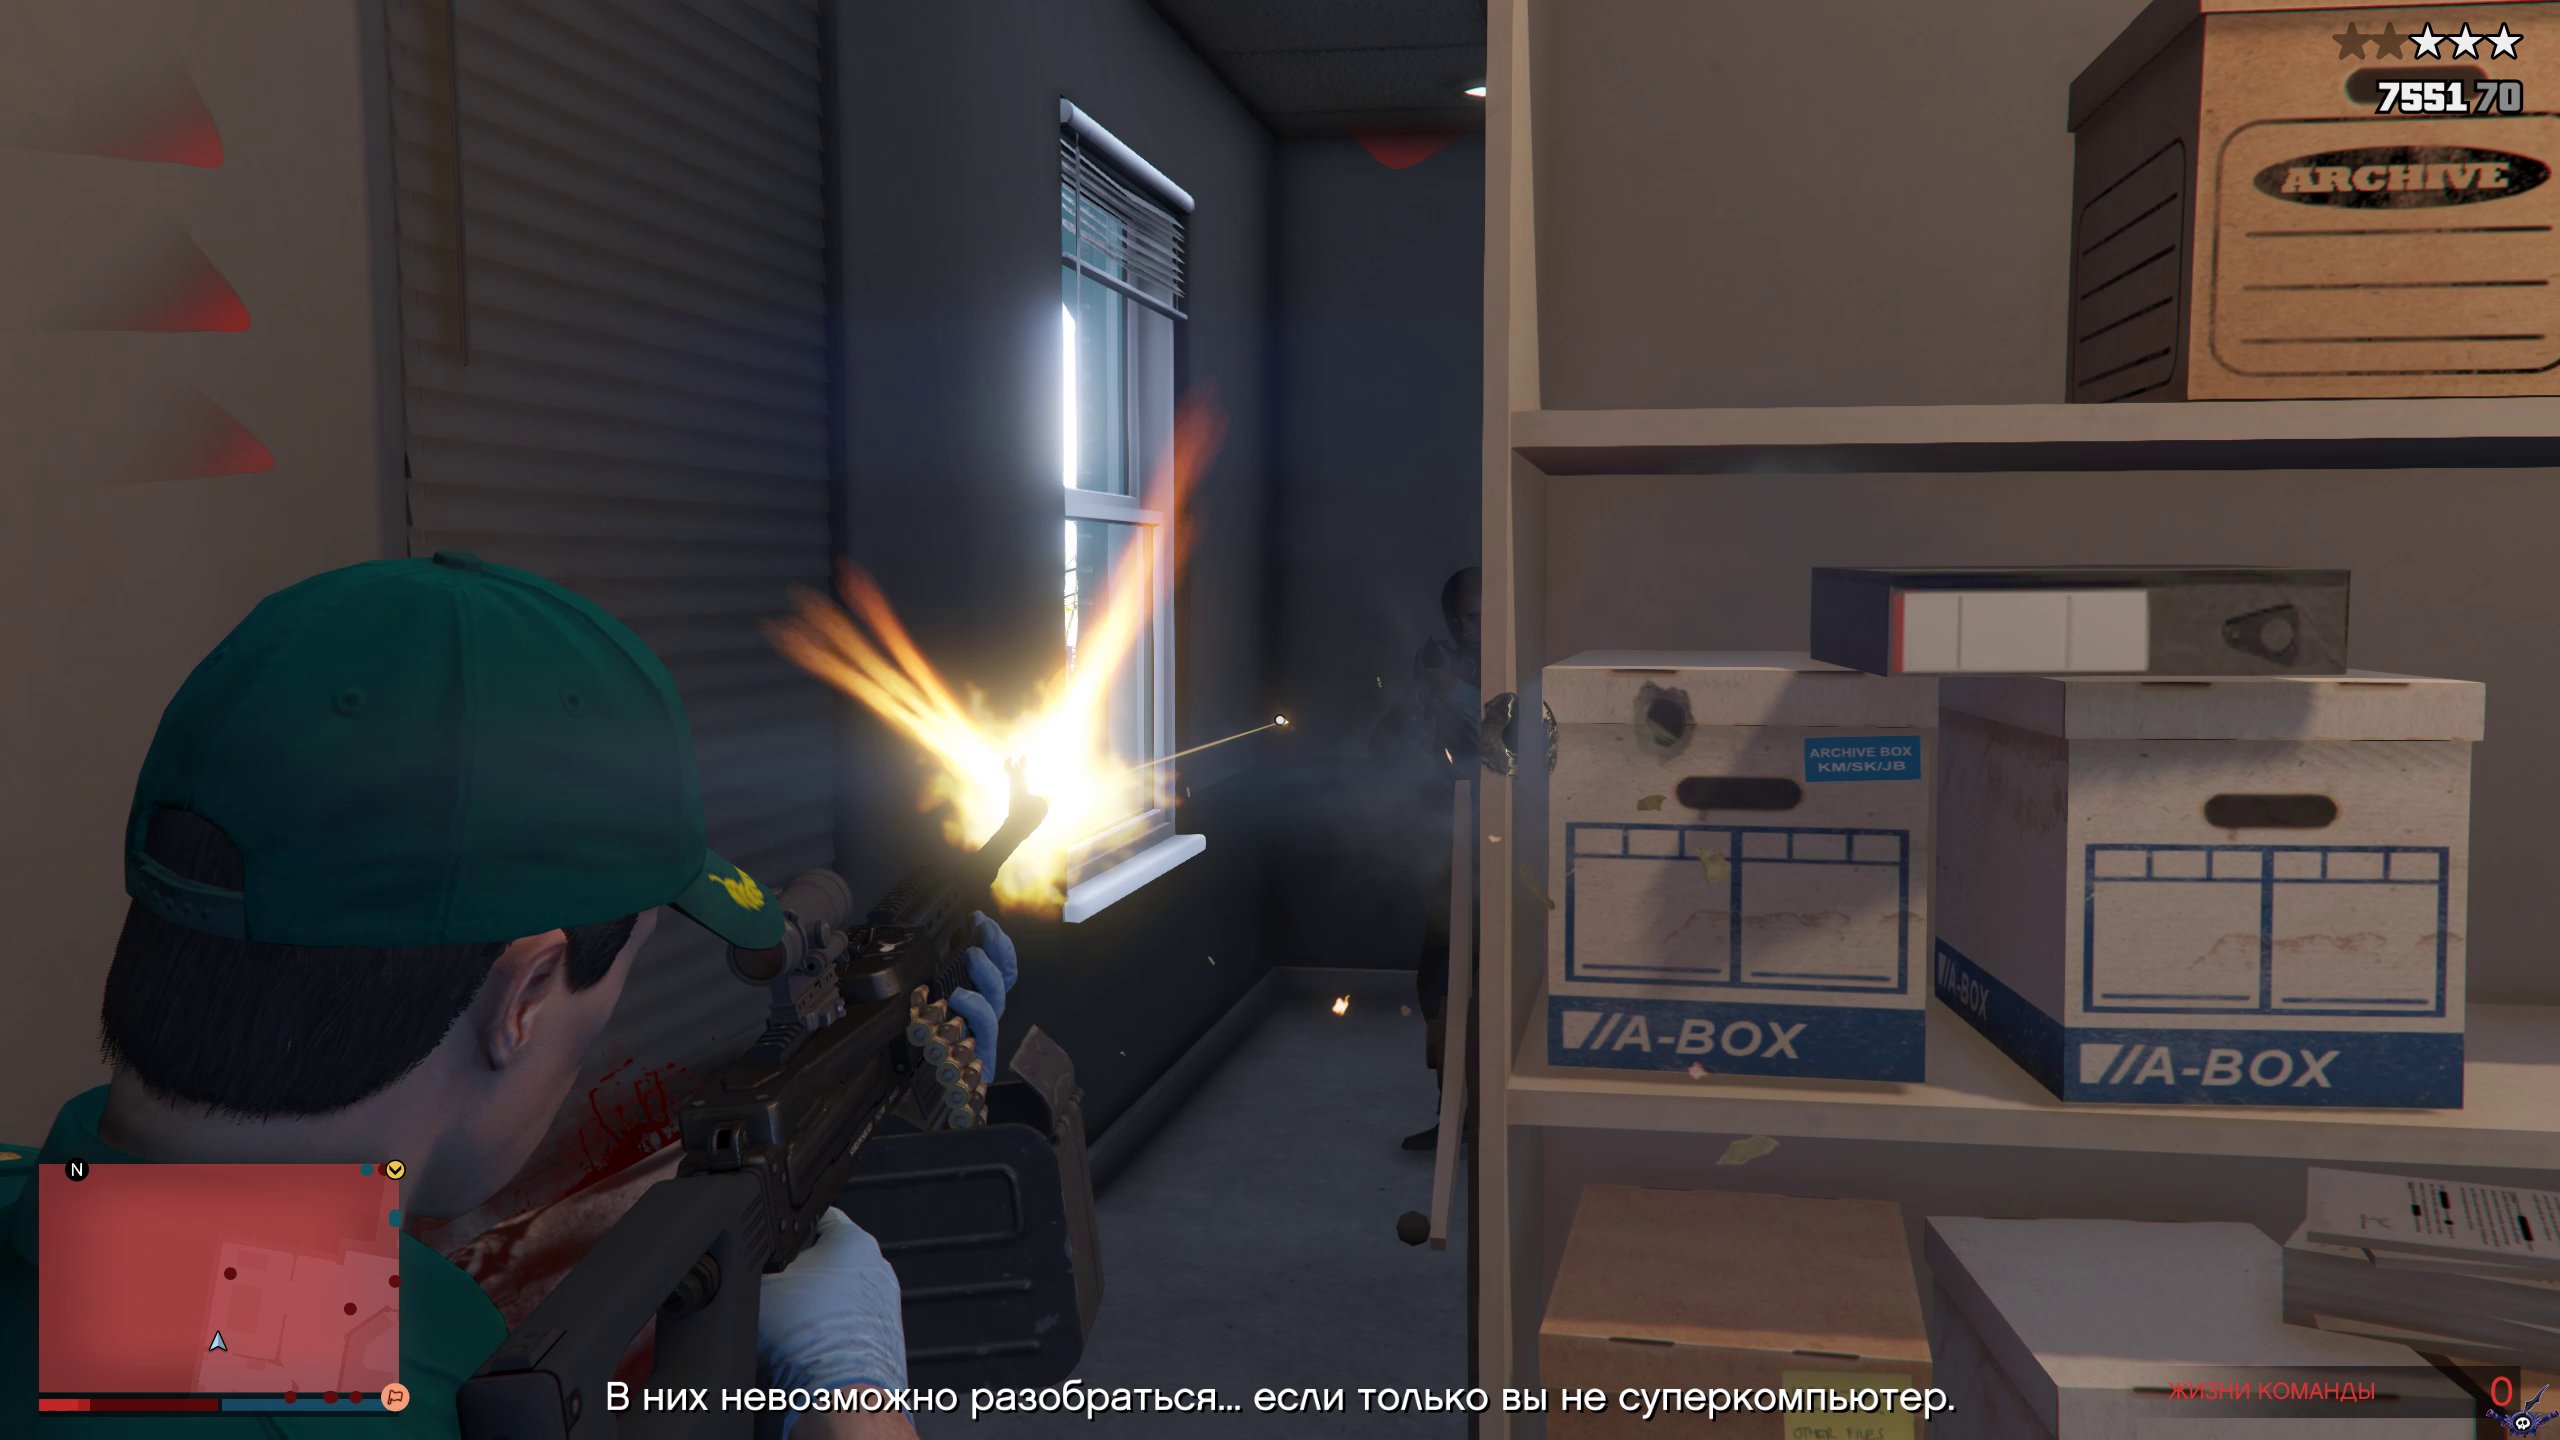 Unsupported gta 5 version detected spb may not work properly фото 81